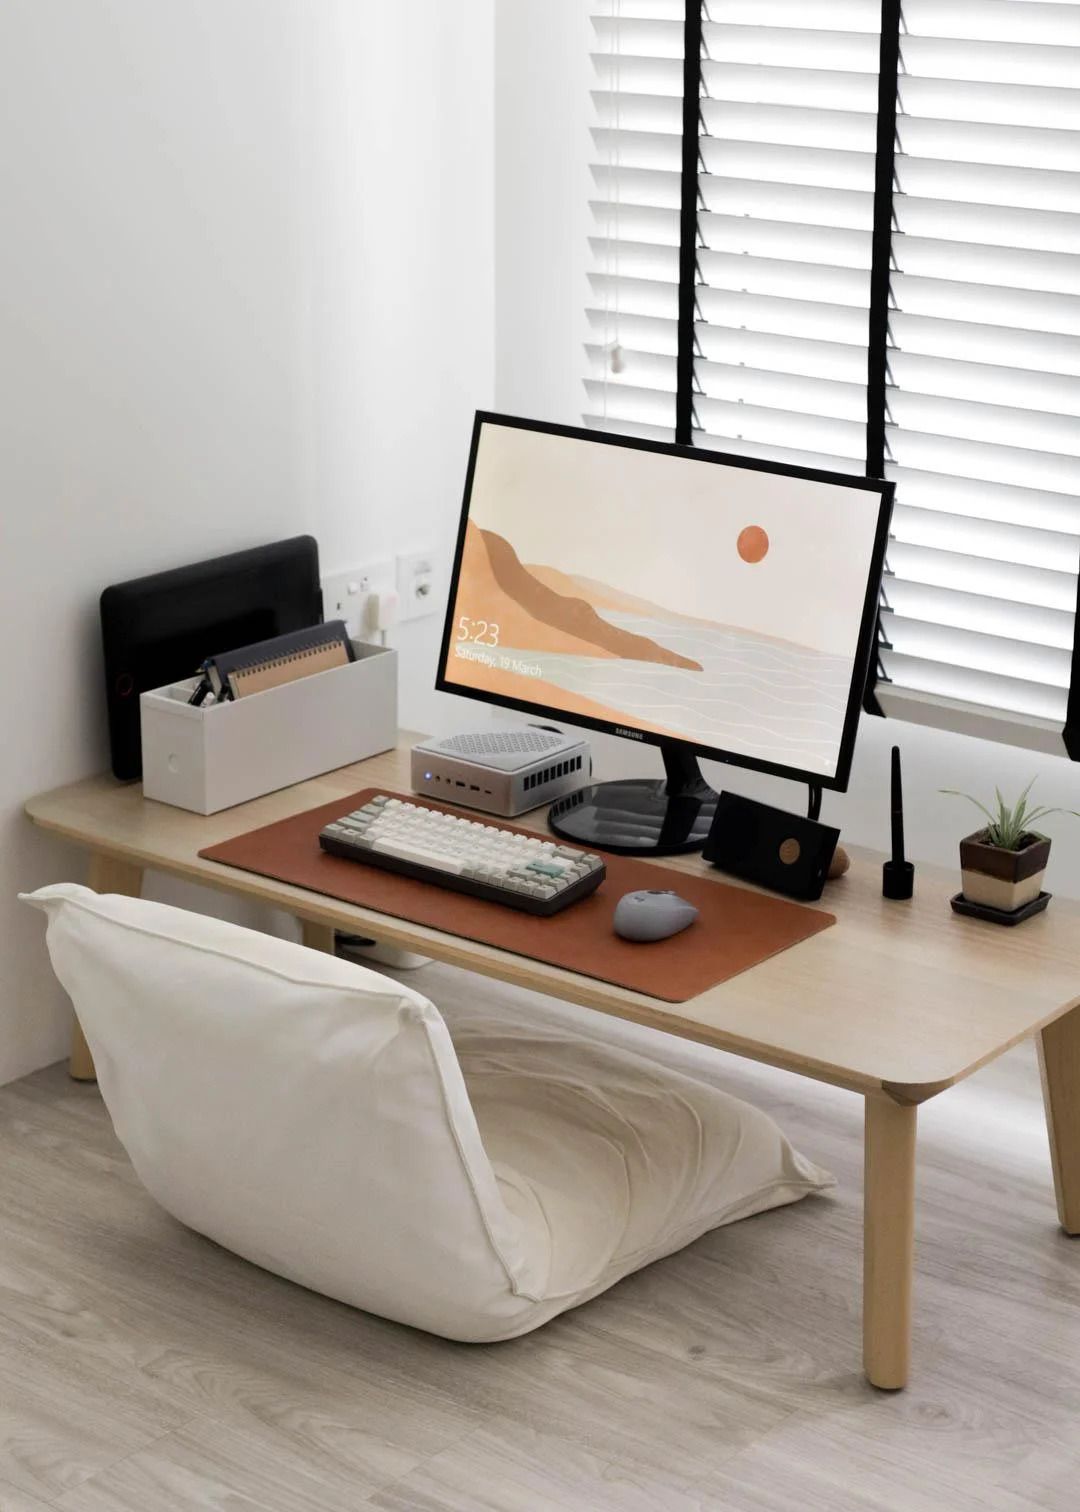 WFH Essentials for Your Home Office Setup » Lovely Indeed